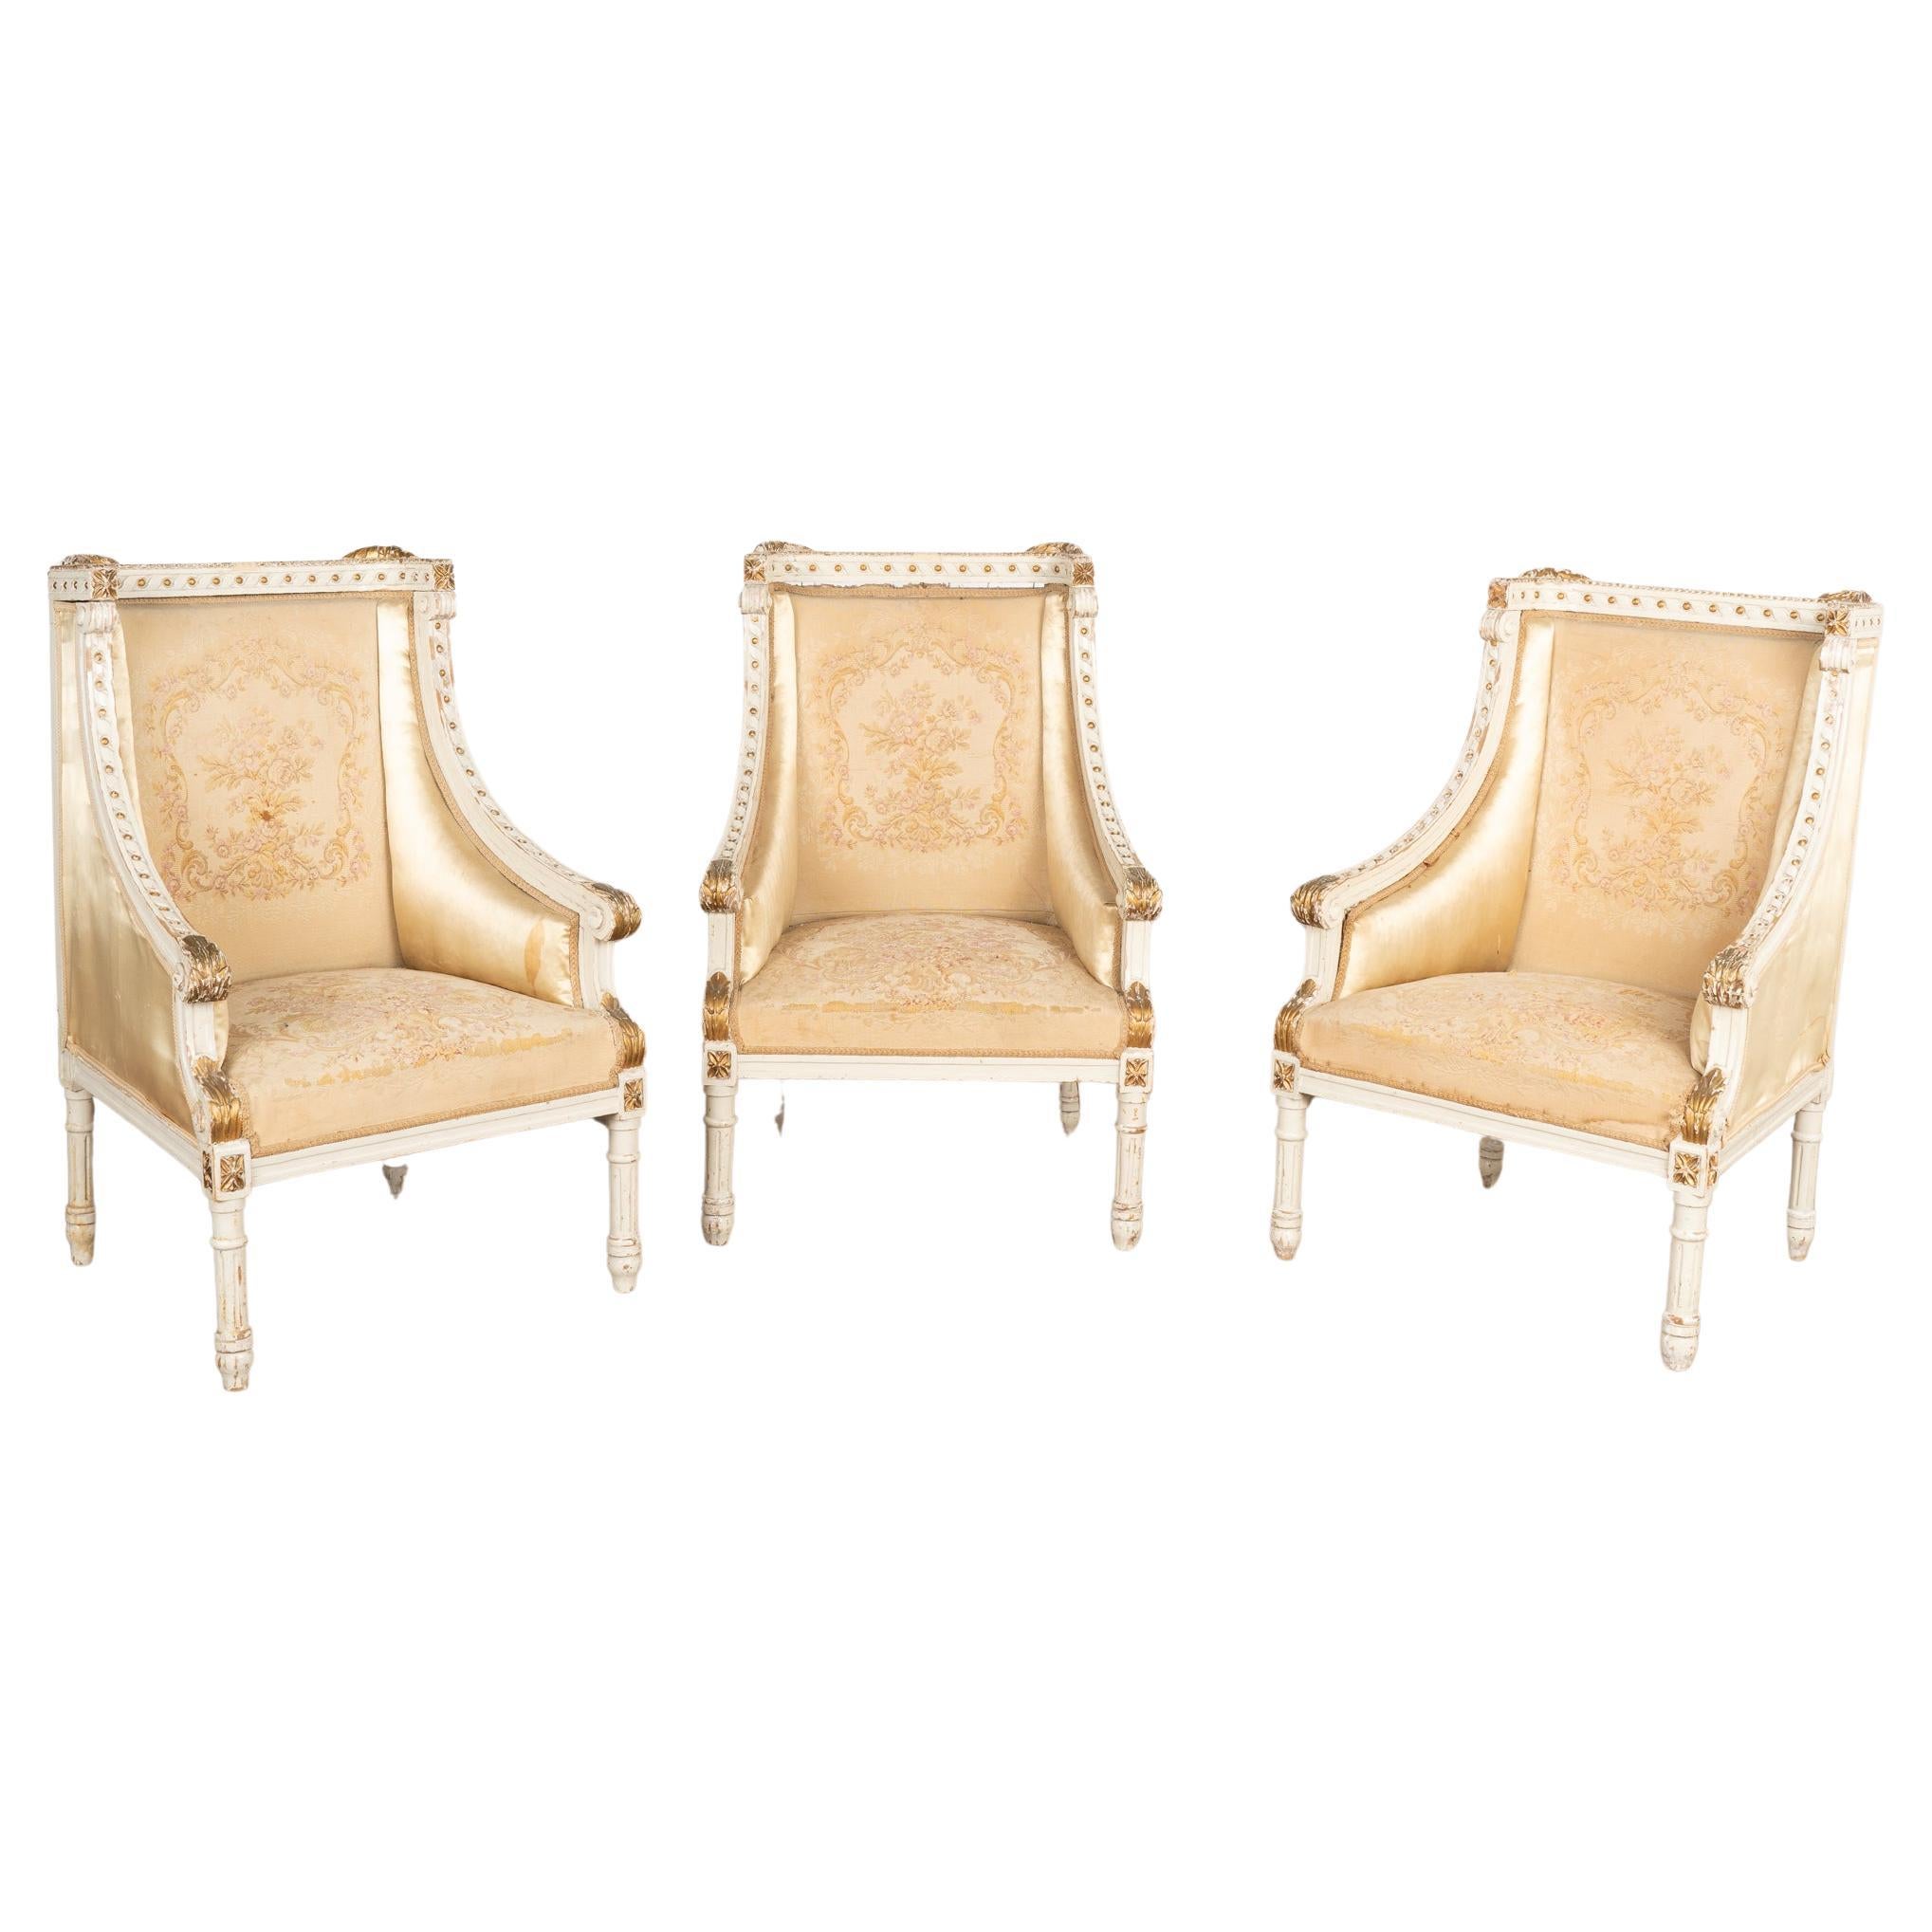 Set of Three White and Gold Arm Chairs, France circa 1890 For Sale